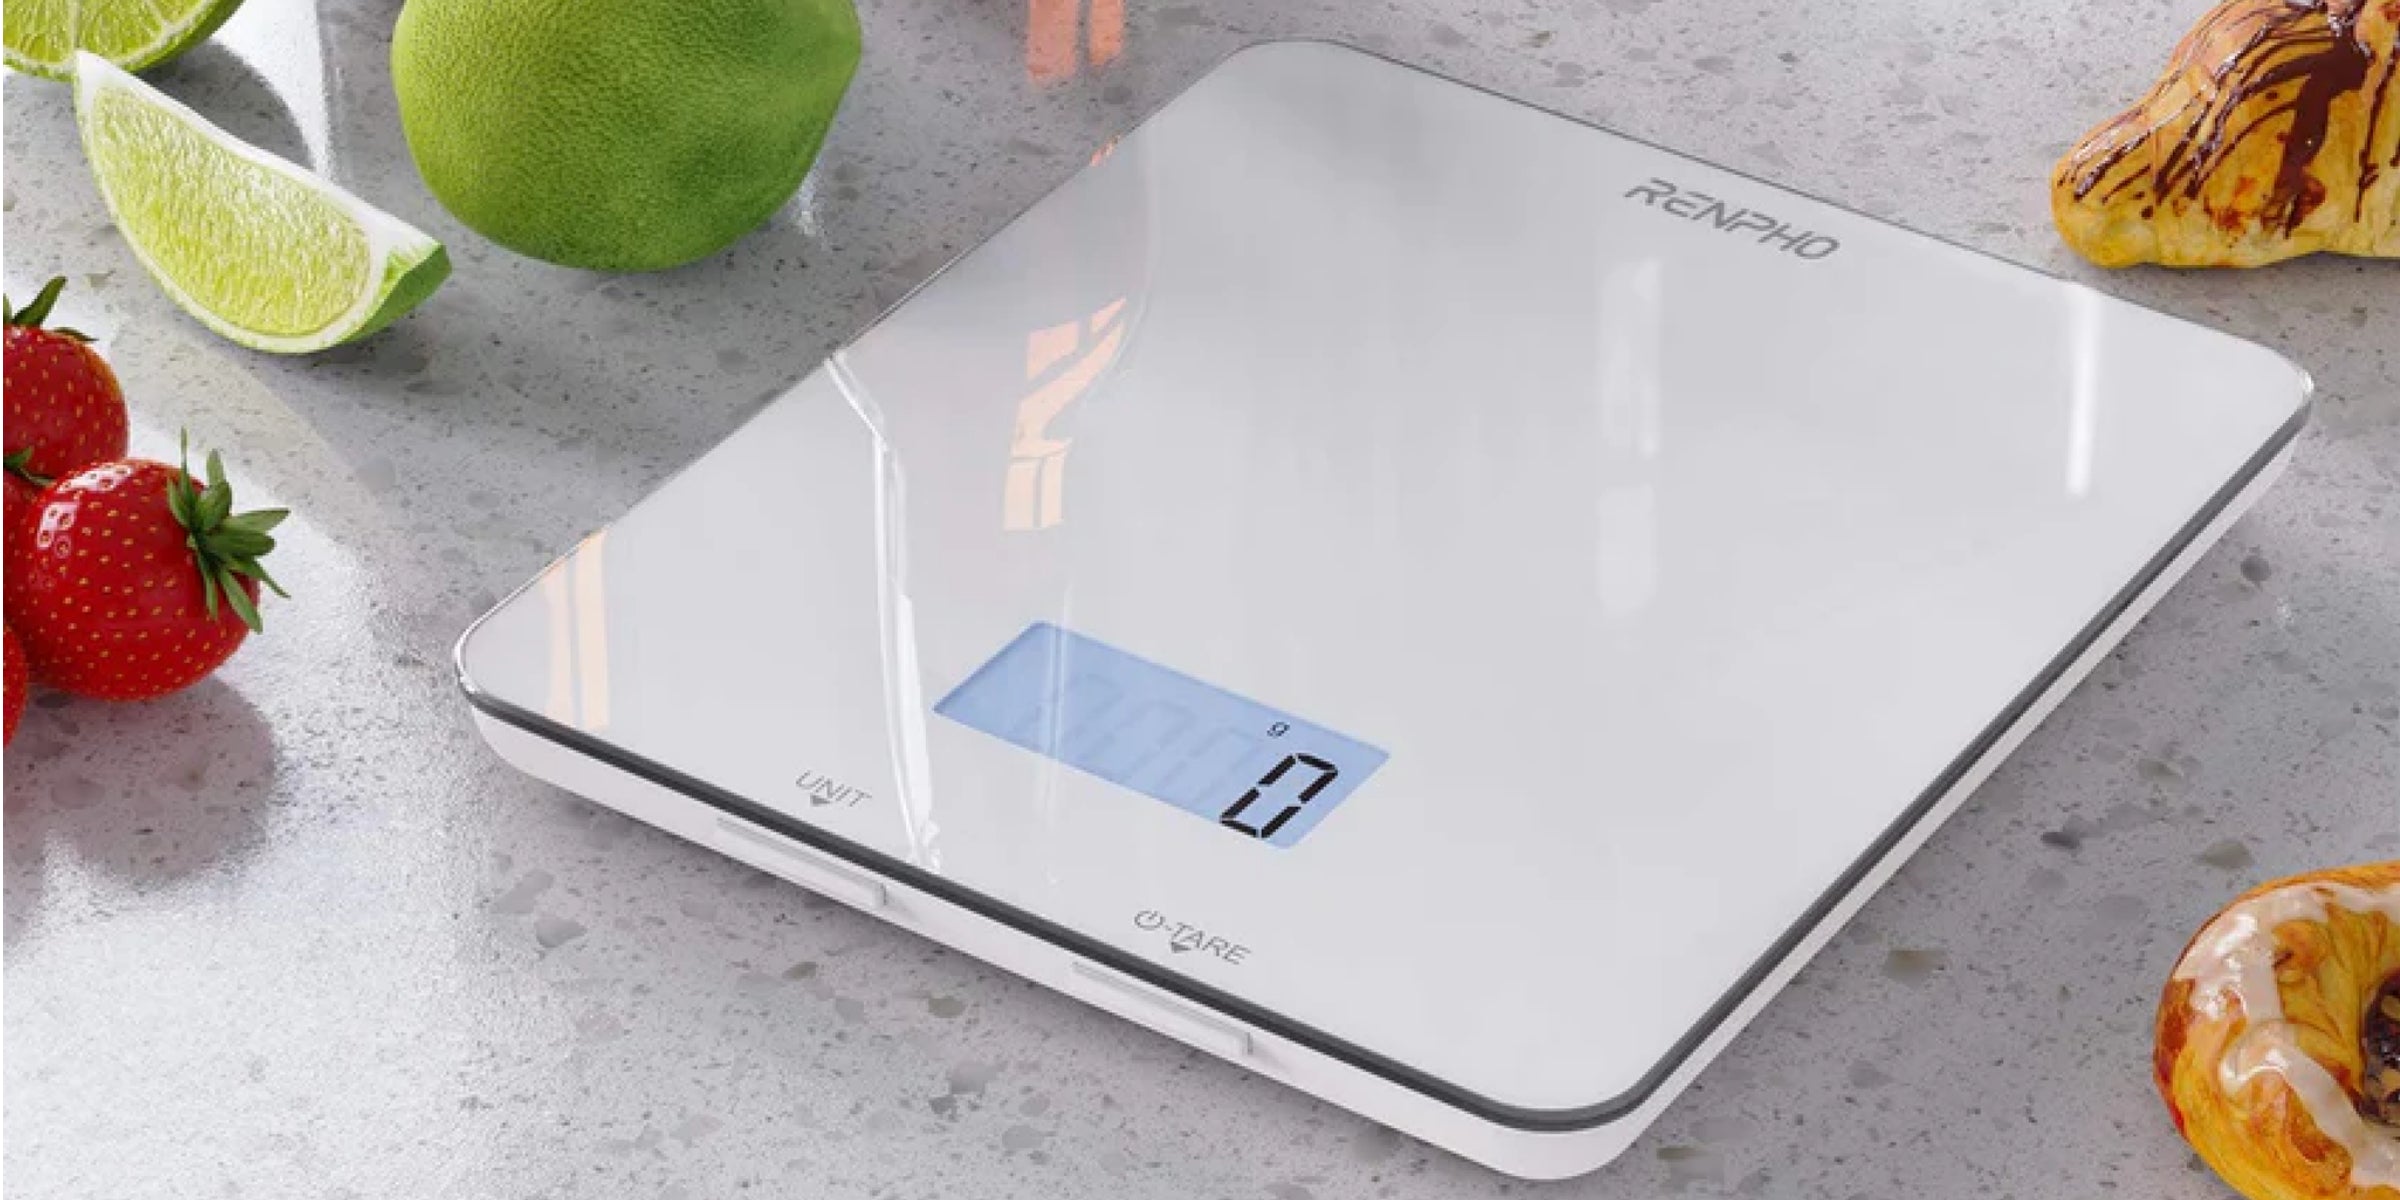 Renpho Digital food scale with APP Control from your phone - extra